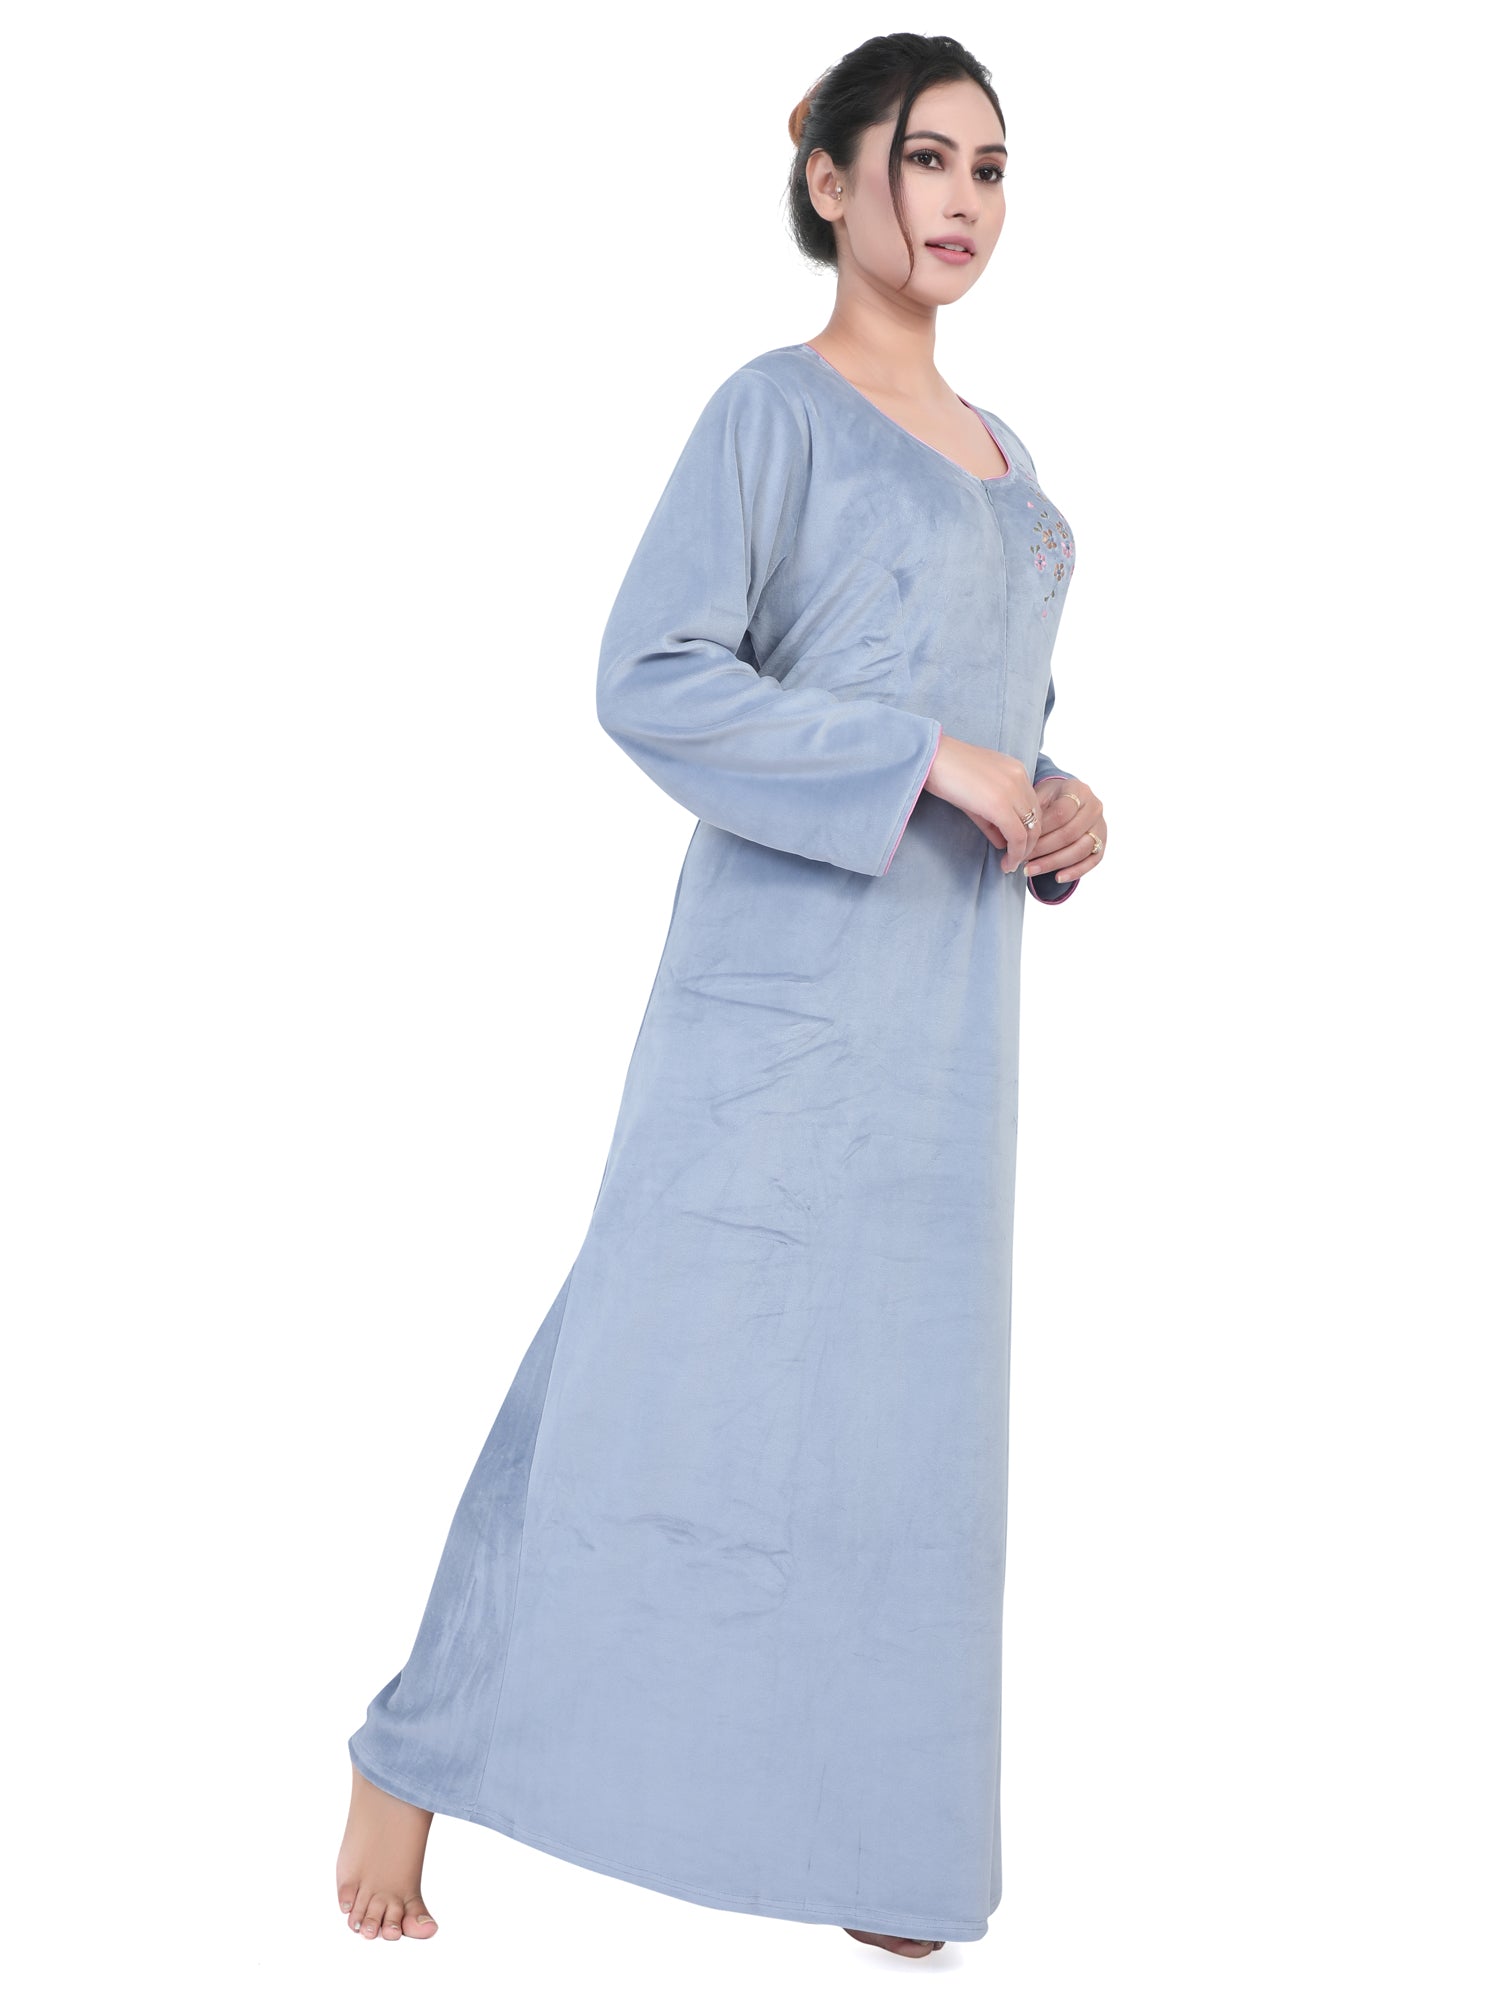 Exquisite Royal Floral Embroidery Stylish Nighty